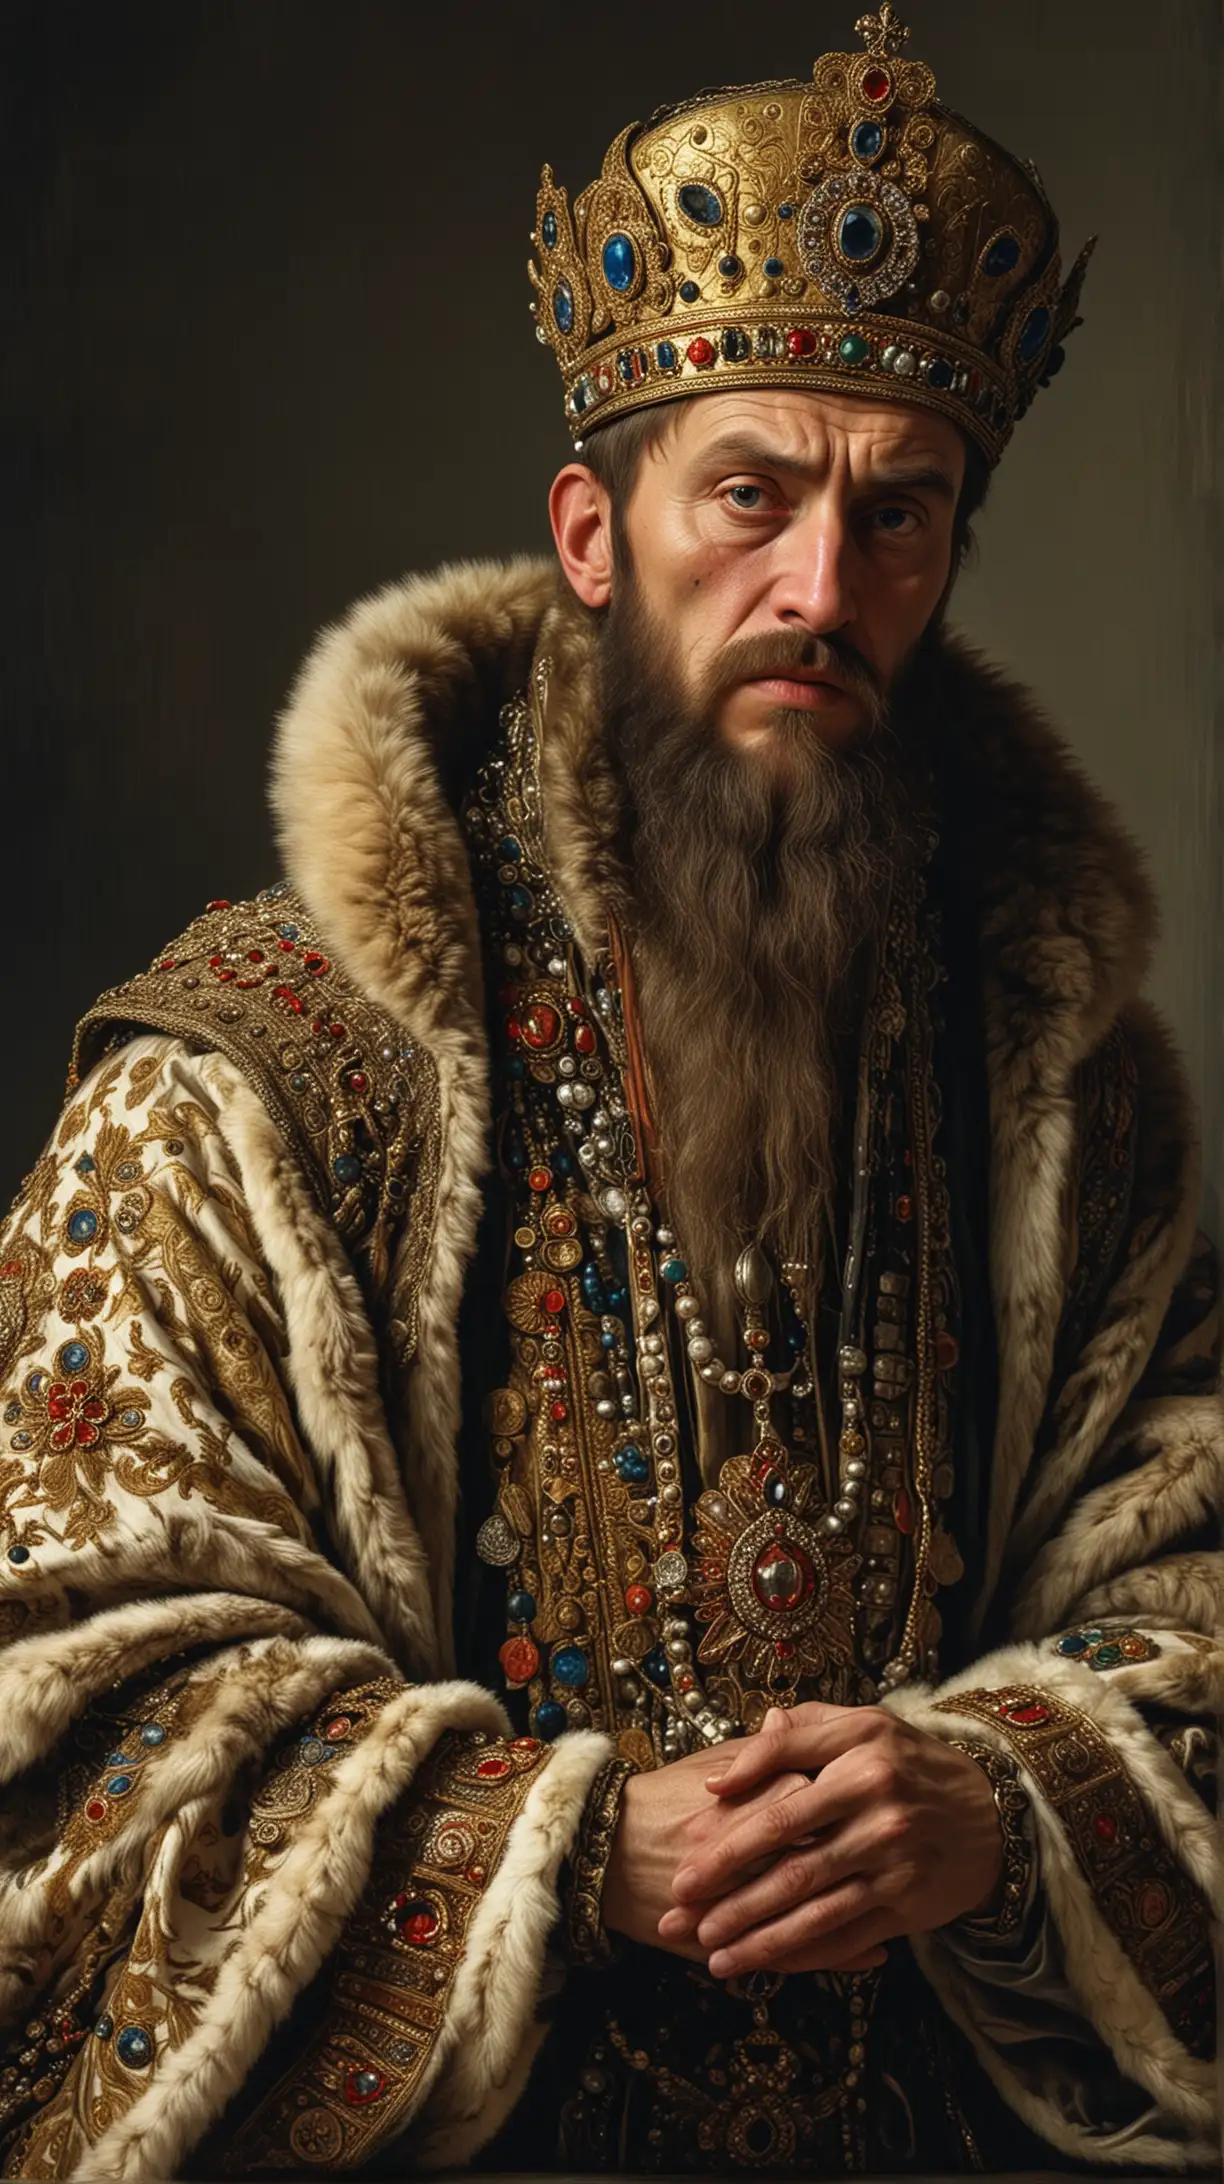 scene, Ivan the Terrible's reign left Russia scarred and bewildered. But what happened after the fearsome Tsar shuffled off this mortal coil in 1584?